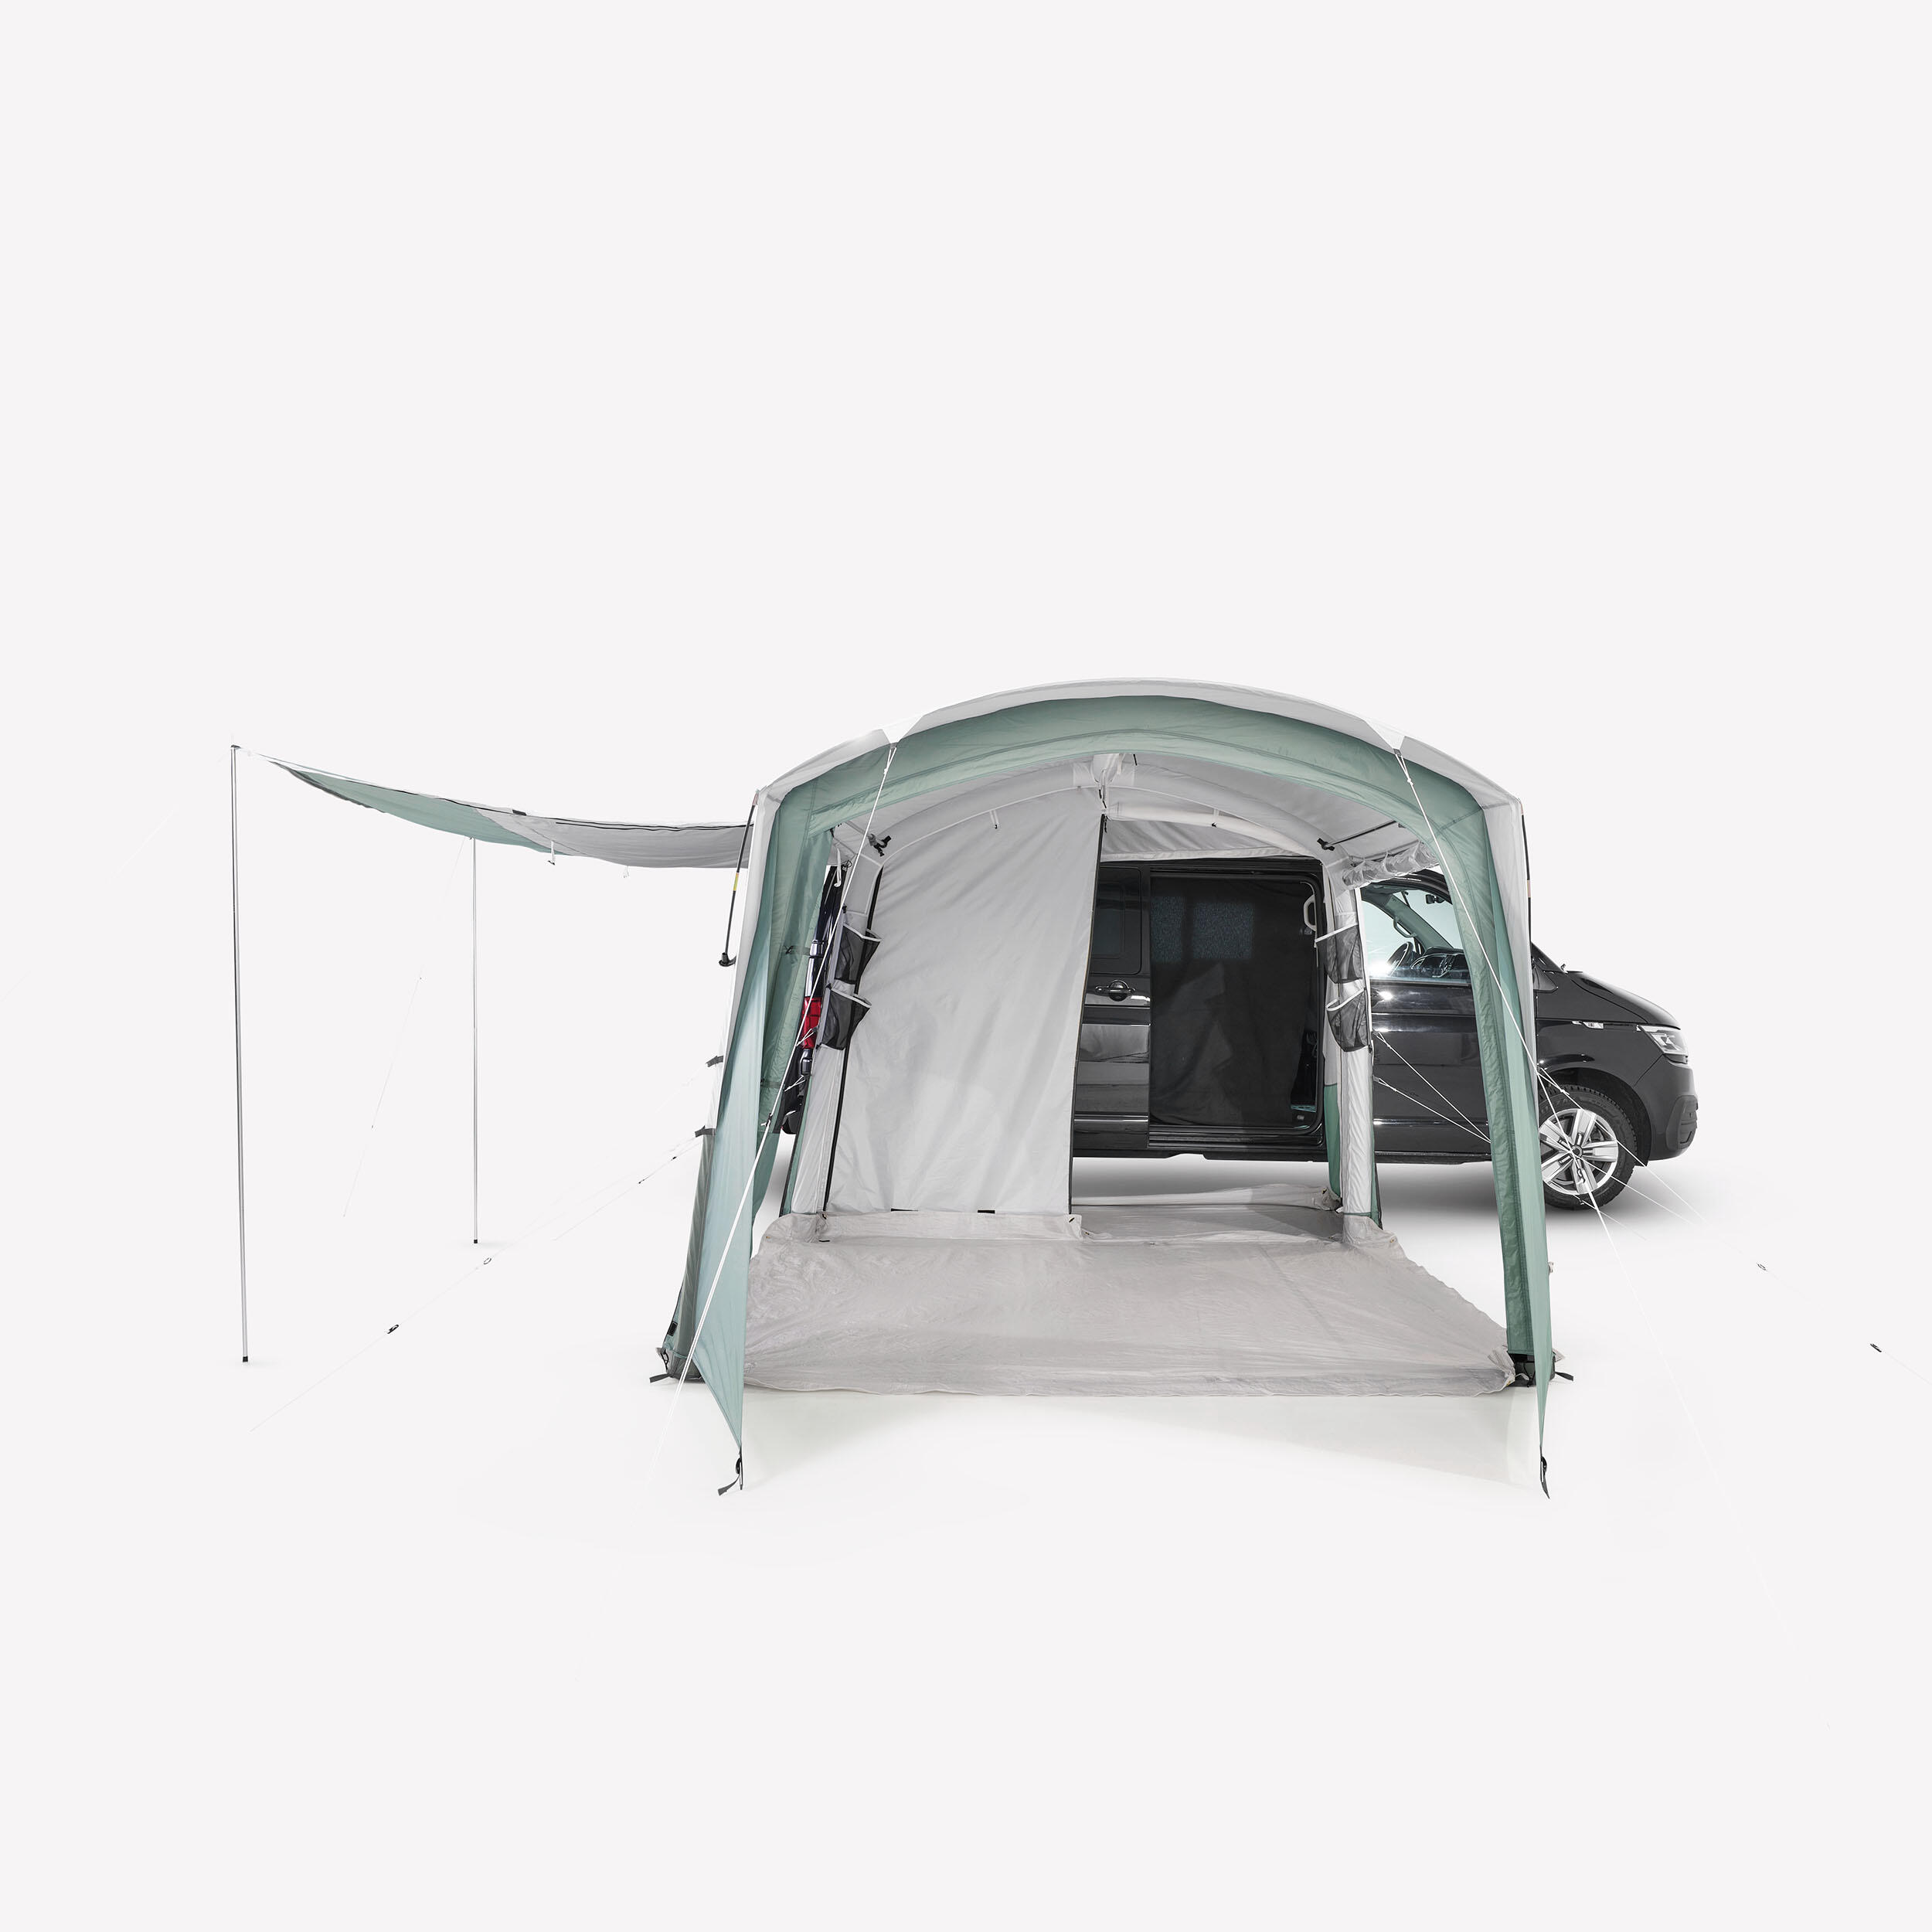 Van and truck inflatable canopy - Van Connect Air Seconds Fresh - 6 people 9/15